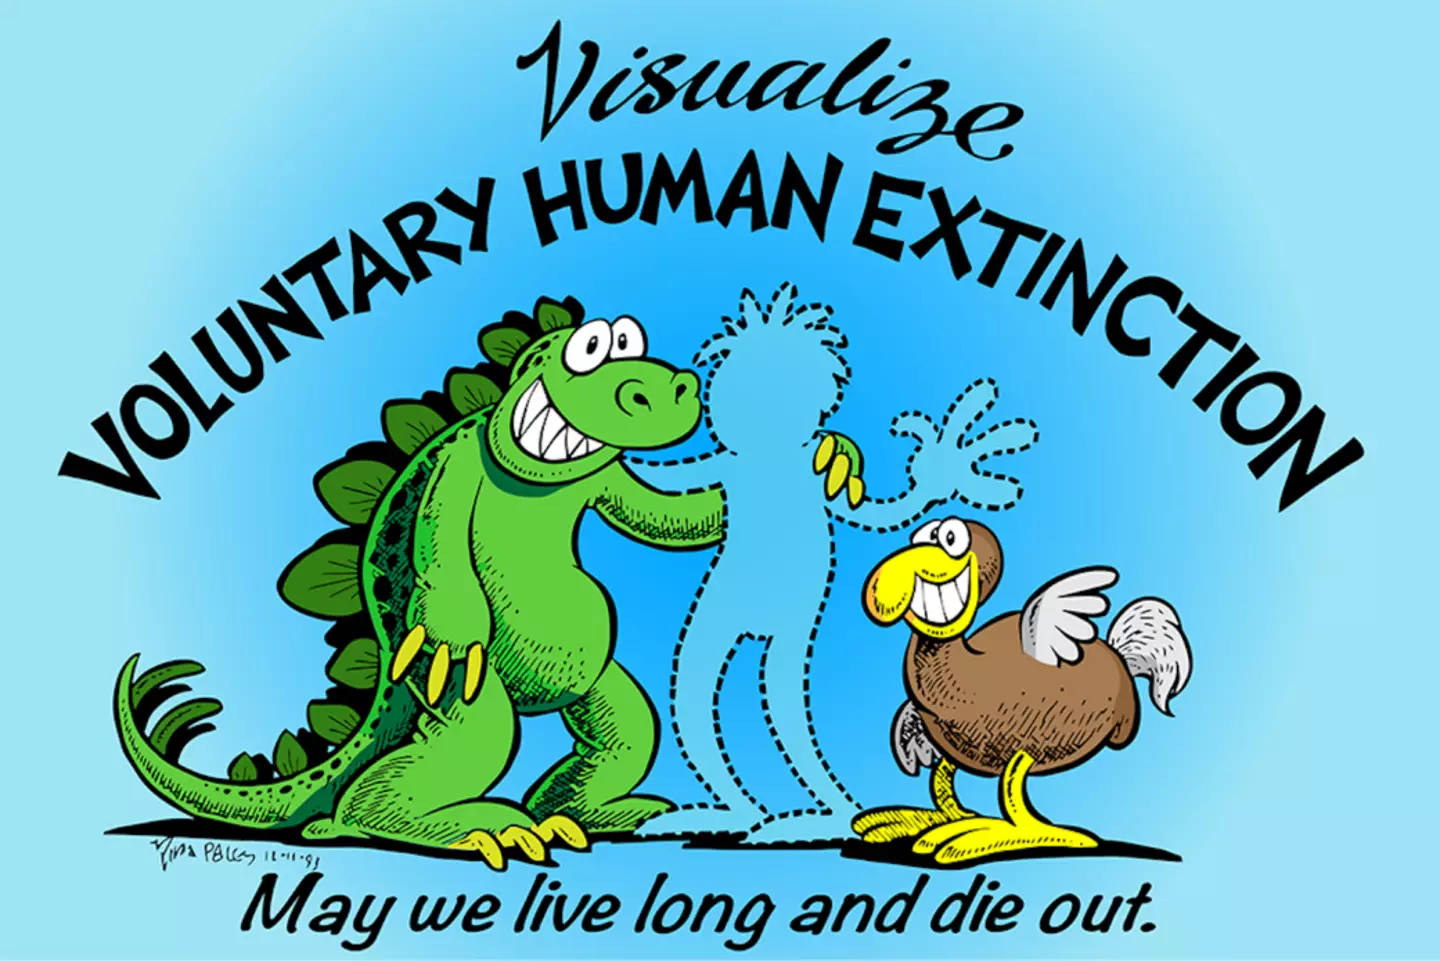 The unofficial motto of the Voluntary Human Extinction Movement.